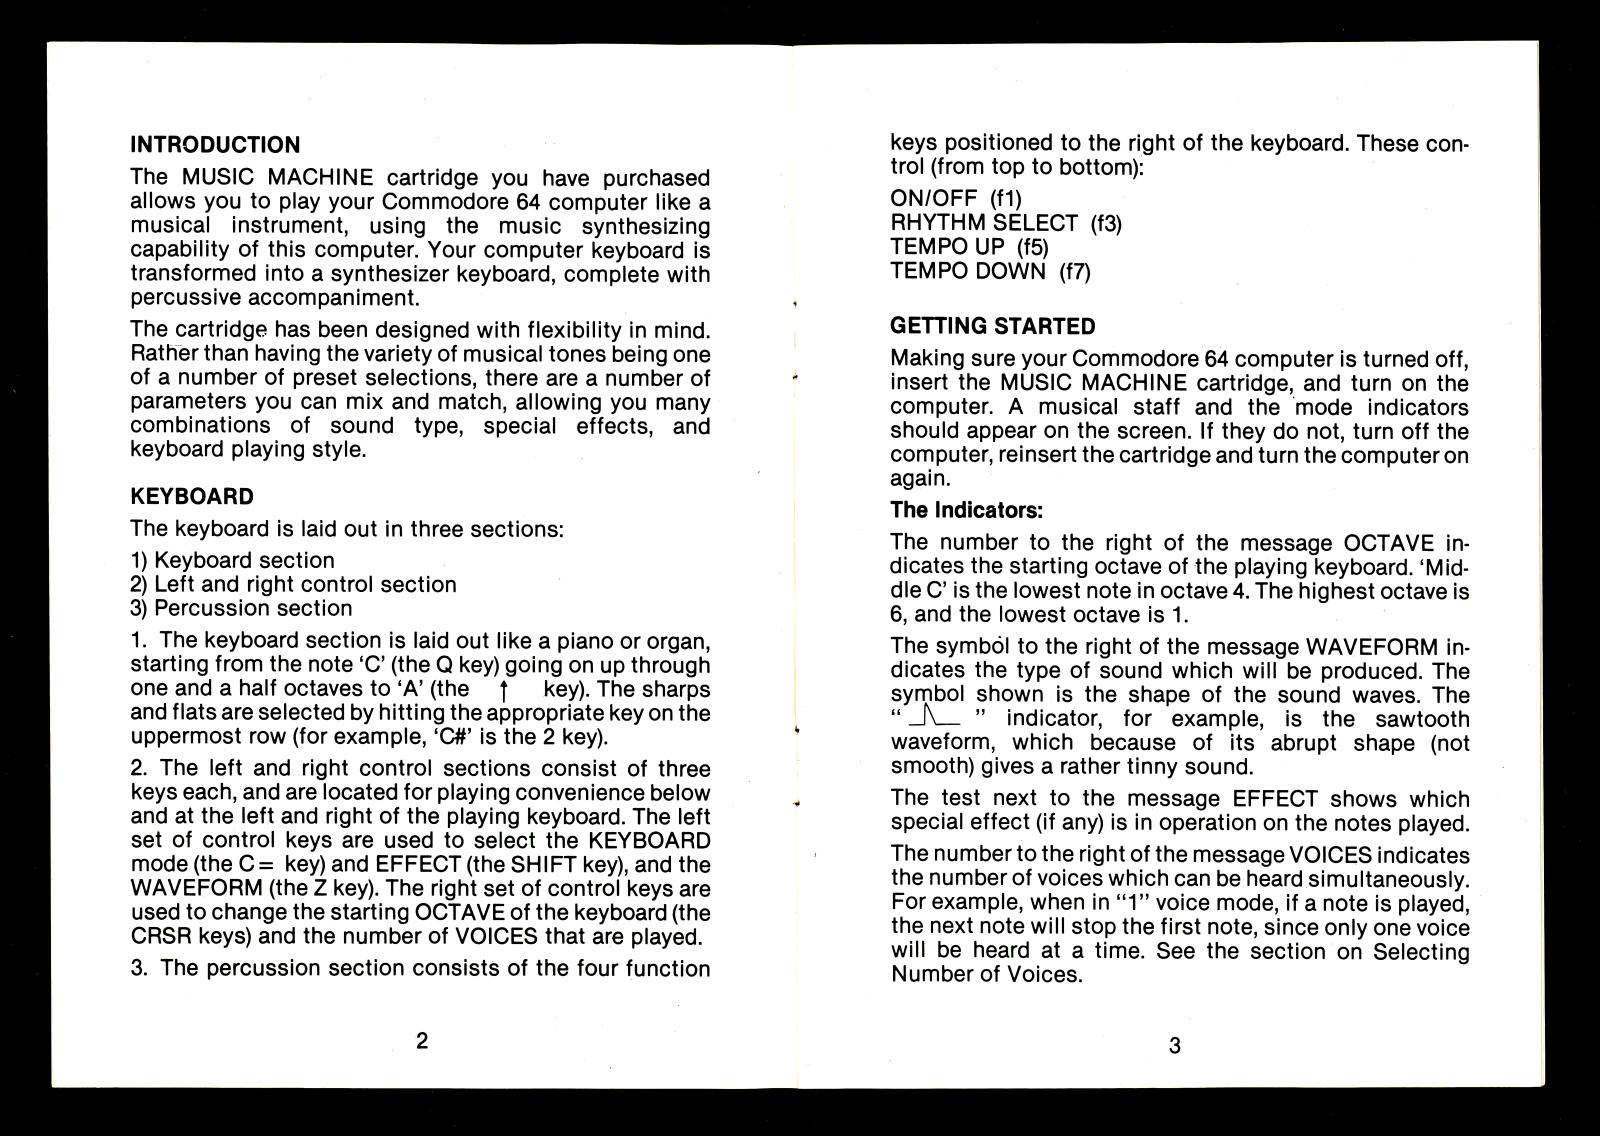 Pages 2 and 3 of the Music Machine instruction book. These two pages have black printing on white paper. On the left hand side, Page 2, is the Introduction and Keyboard sections. On the right hand side, Page 3, is the Getting Started section.